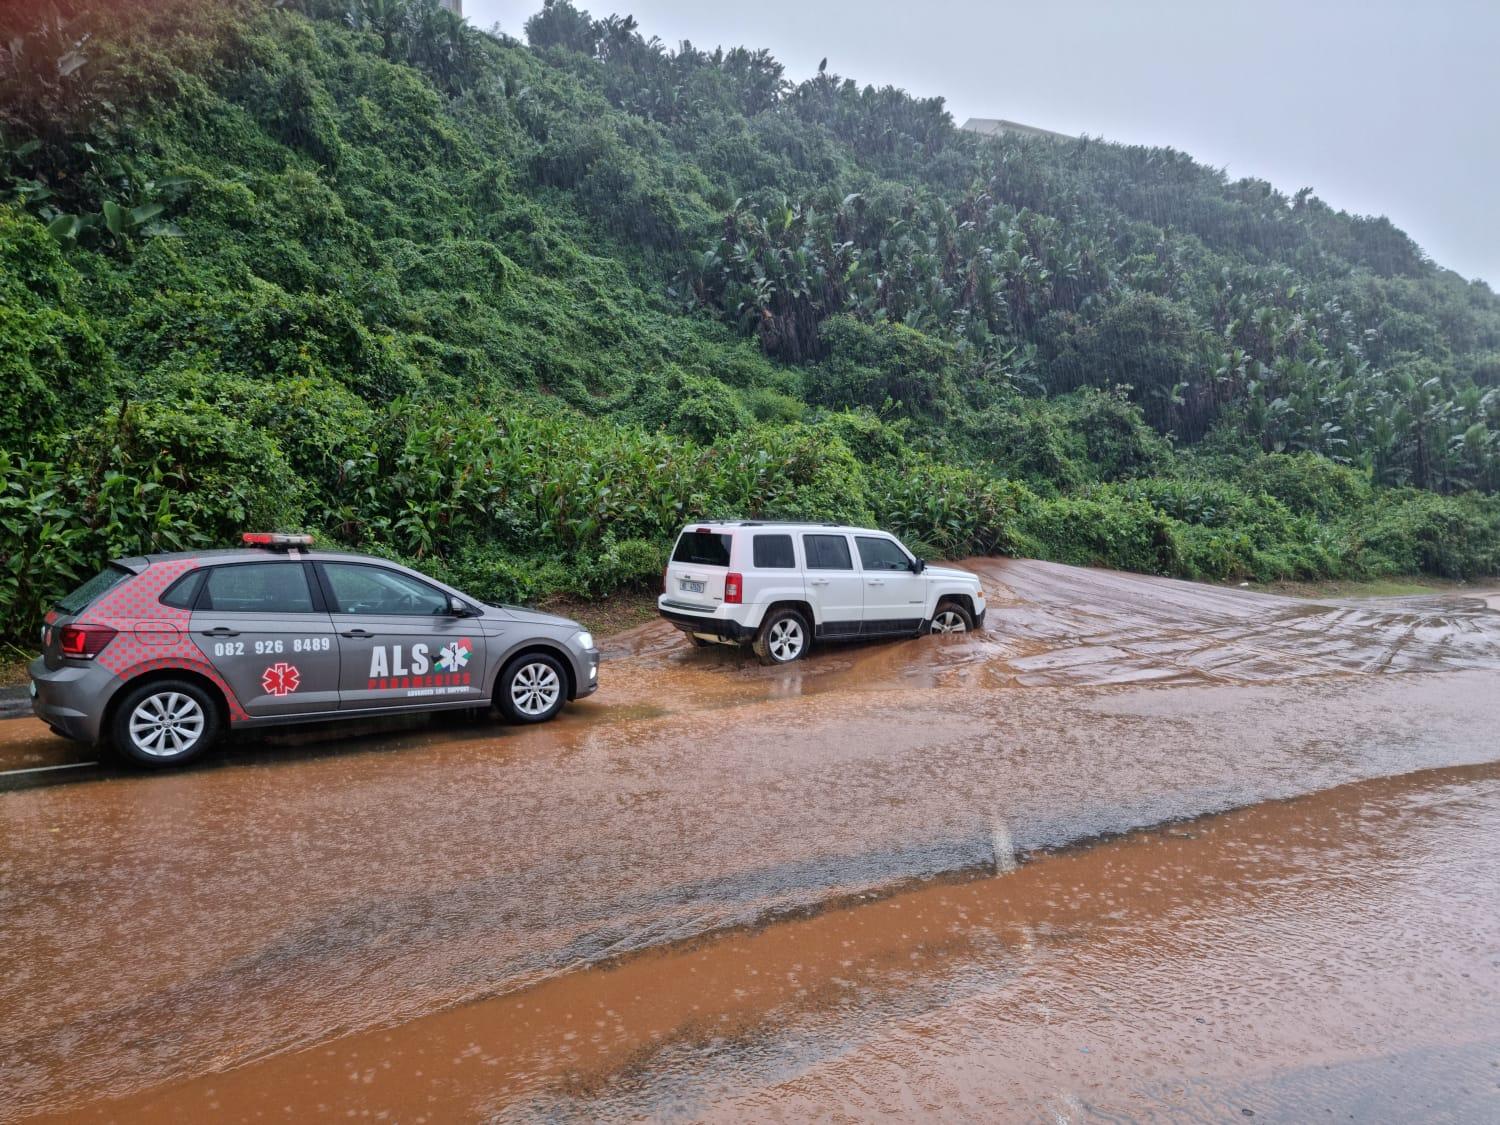 Search and rescue teams leap into action amid renewed flooding in KZN